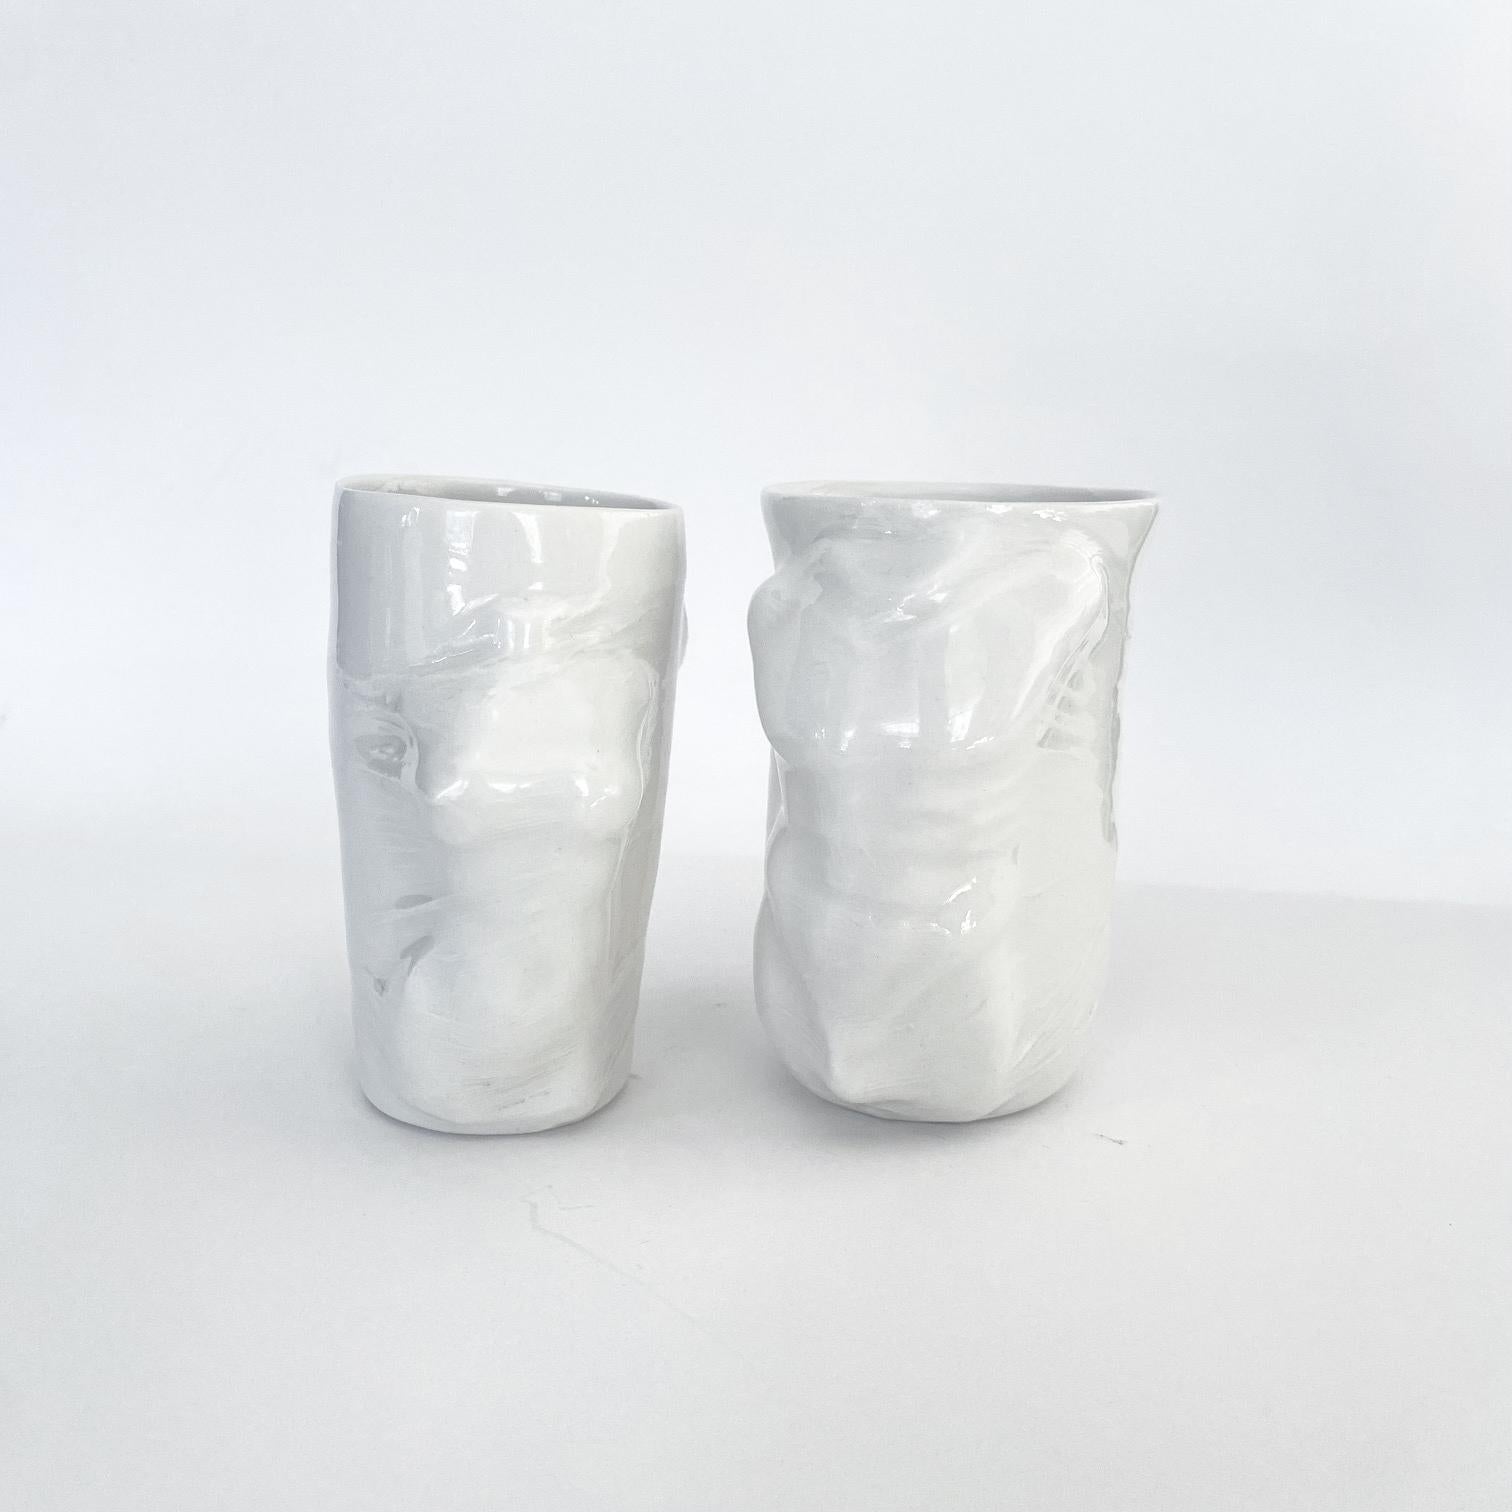 Sculptural Porcelain Cups Set of 2 by Hulya Sozer, Male and Female Body, White In New Condition For Sale In Mugla, Bodrum